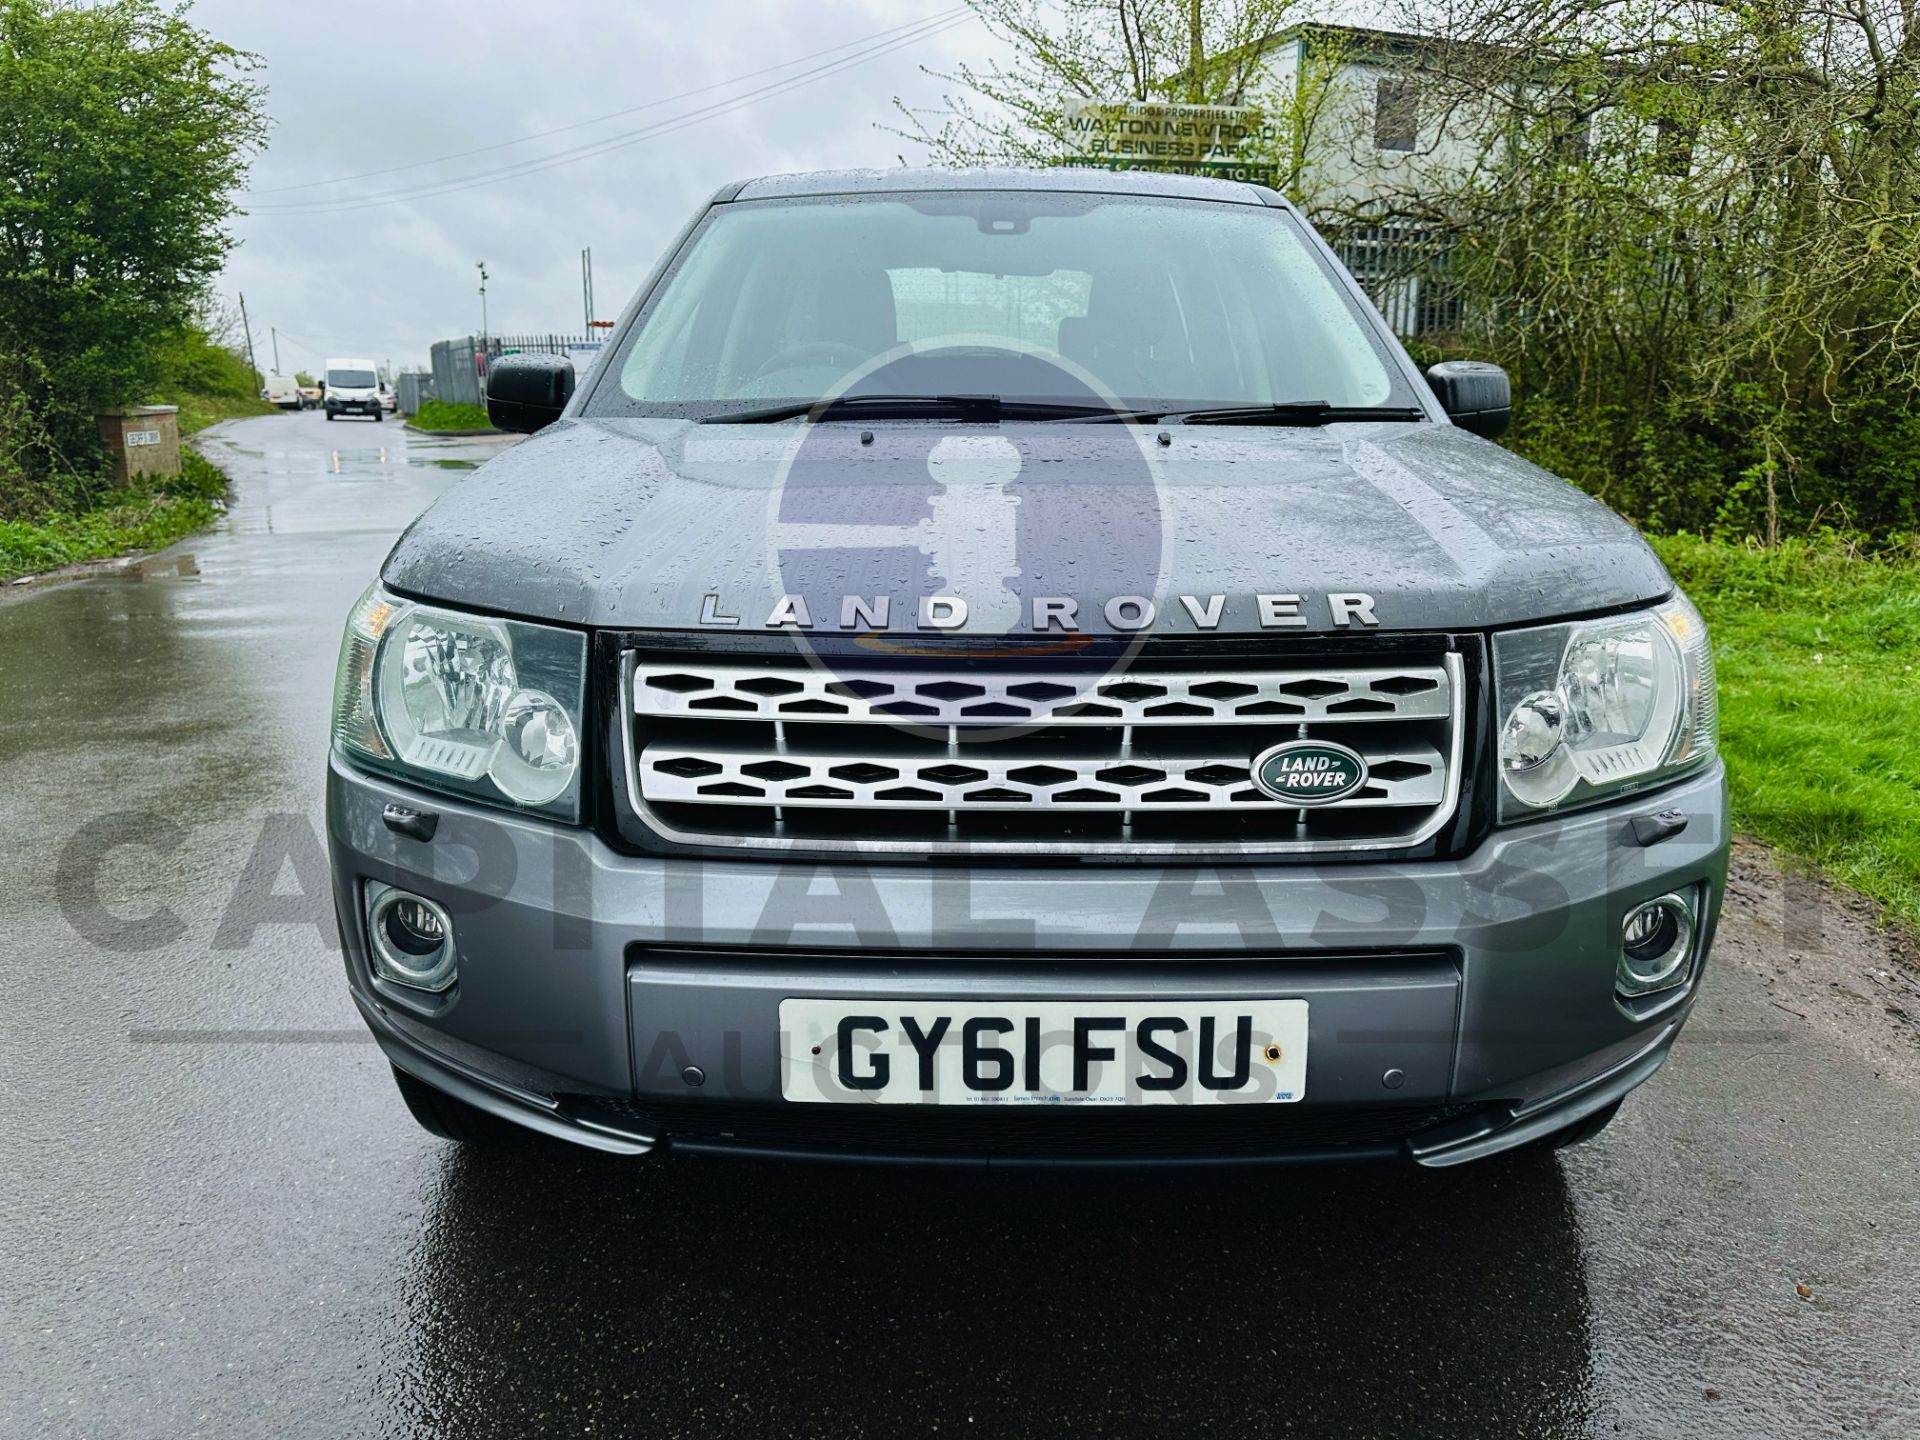 (ON SALE) LANDROVER FREELANDER 2.2TD4 S EDITION "AUTO - 2012 MODEL - AIR CON - FSH - Image 3 of 33